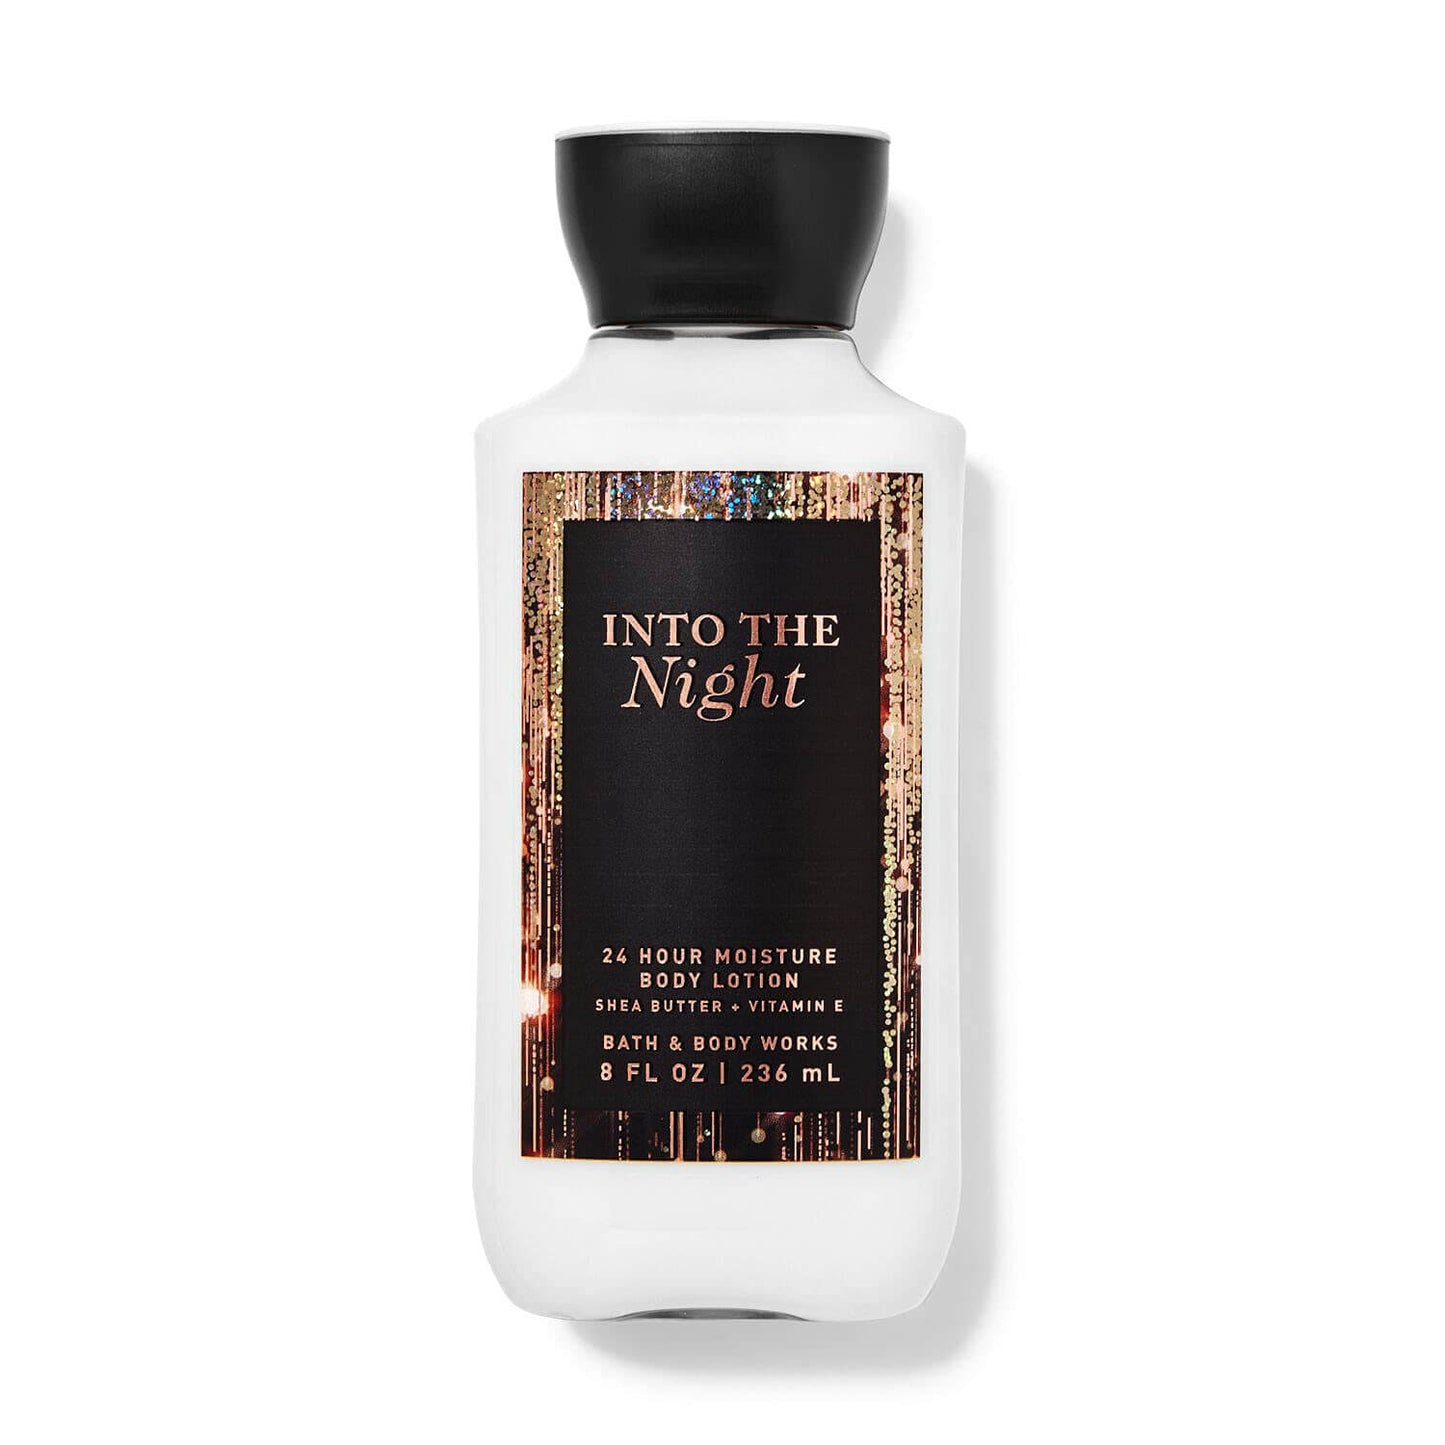 Bath & Body Works body lotion Into the night available for delivery at Heygirl.pk in Pakistan.